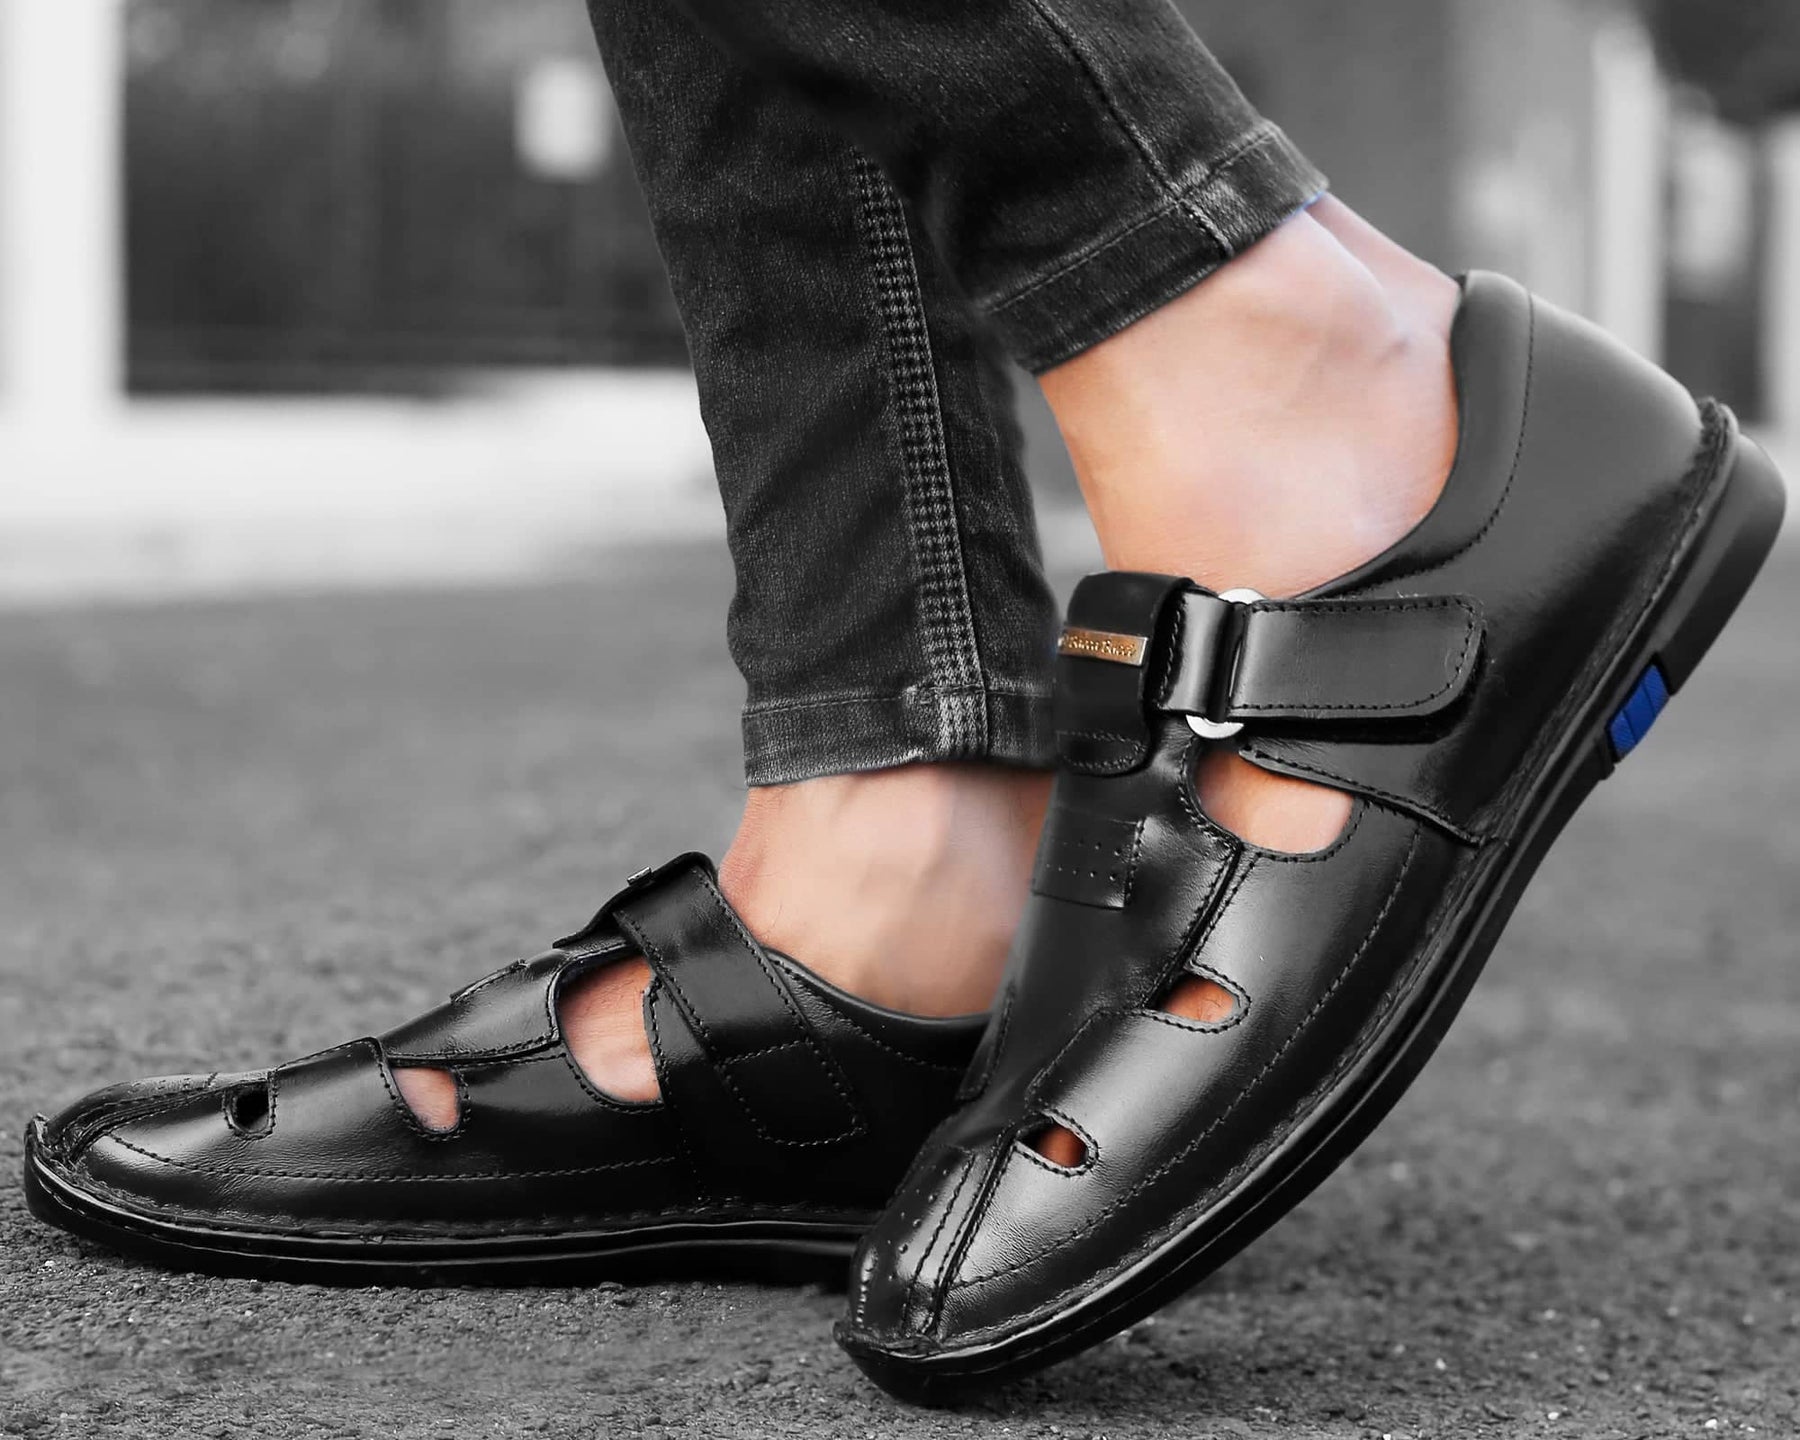 Handmade in Italy mens sandals in dark brown leather | The leather craftsmen